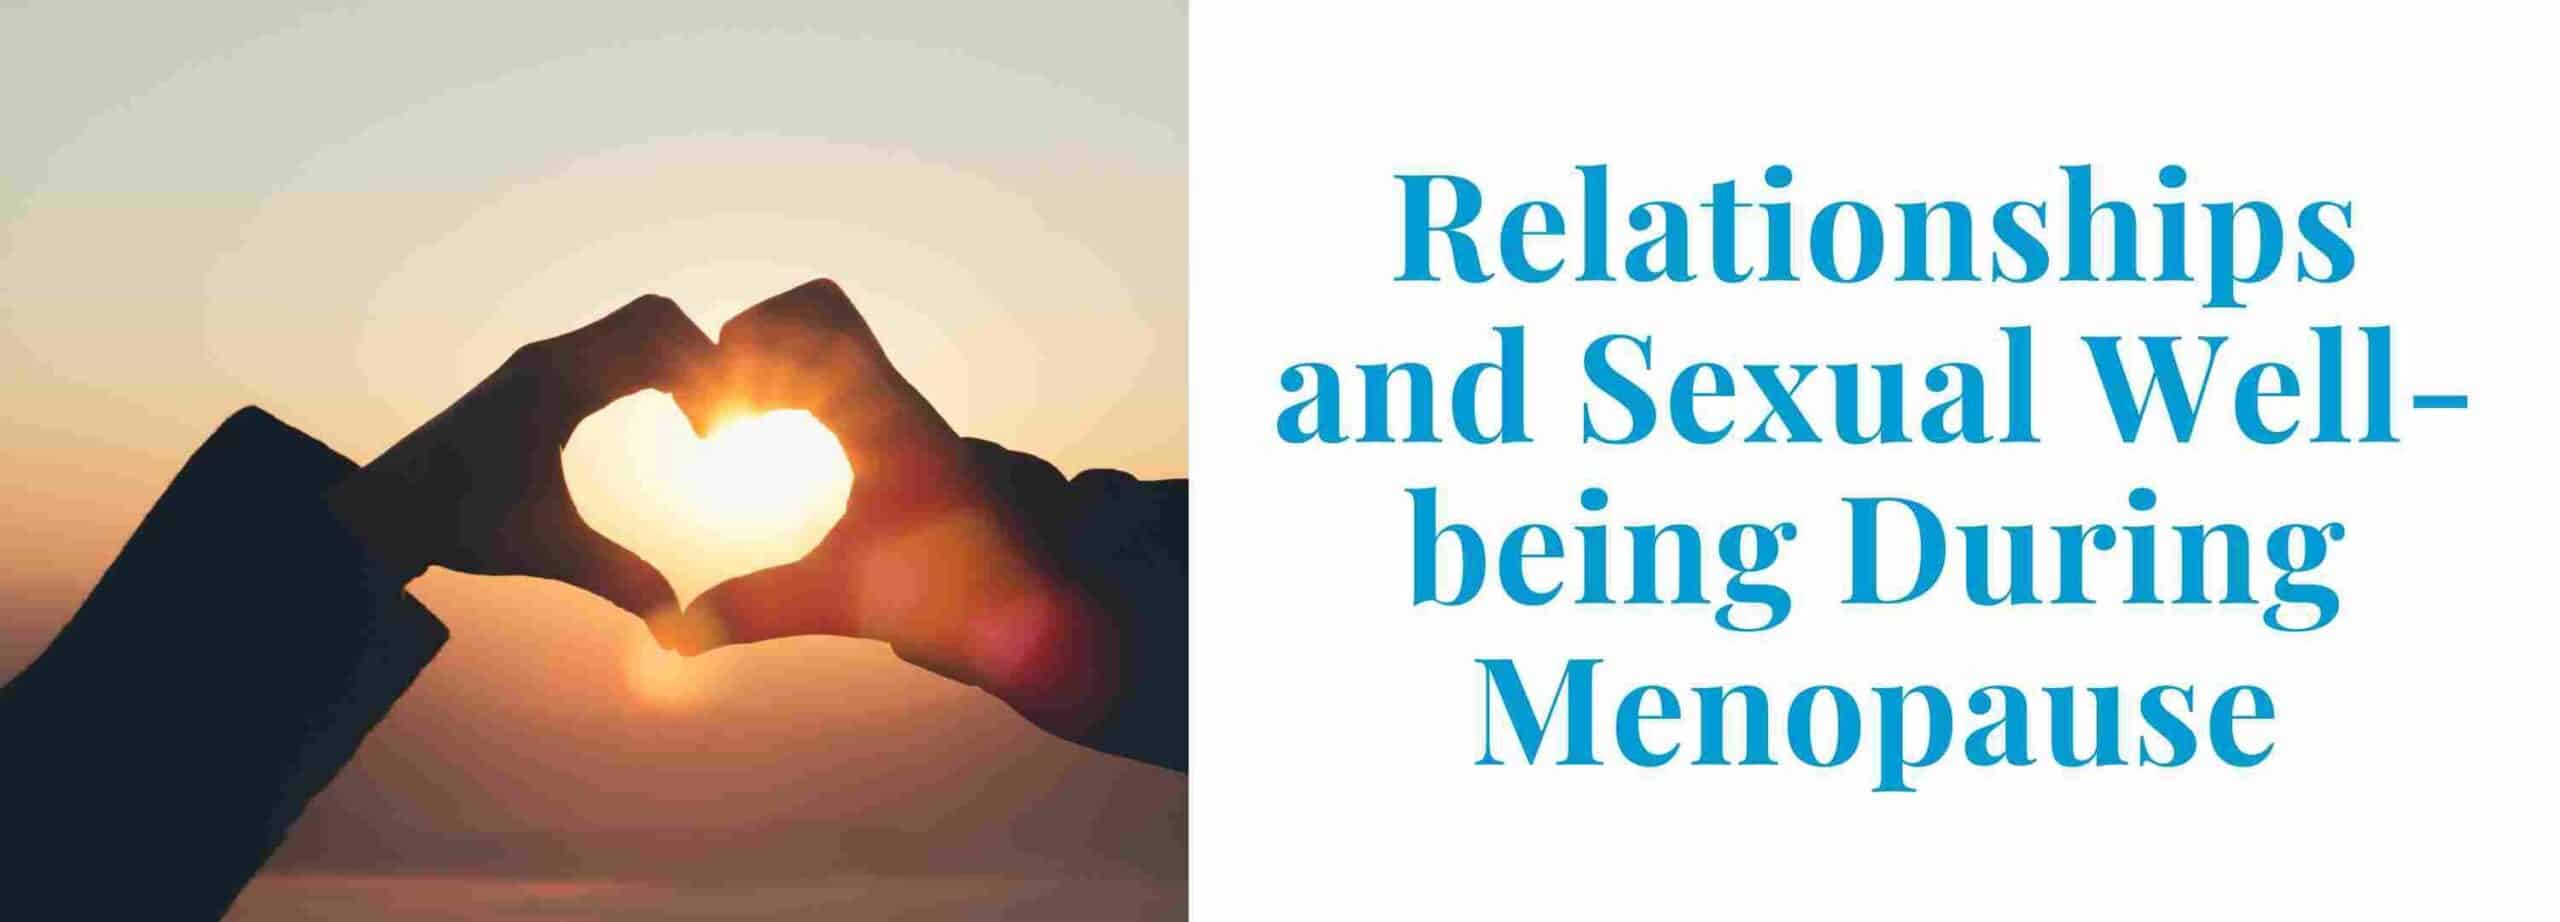 Relationships and sexual well-being during menopause